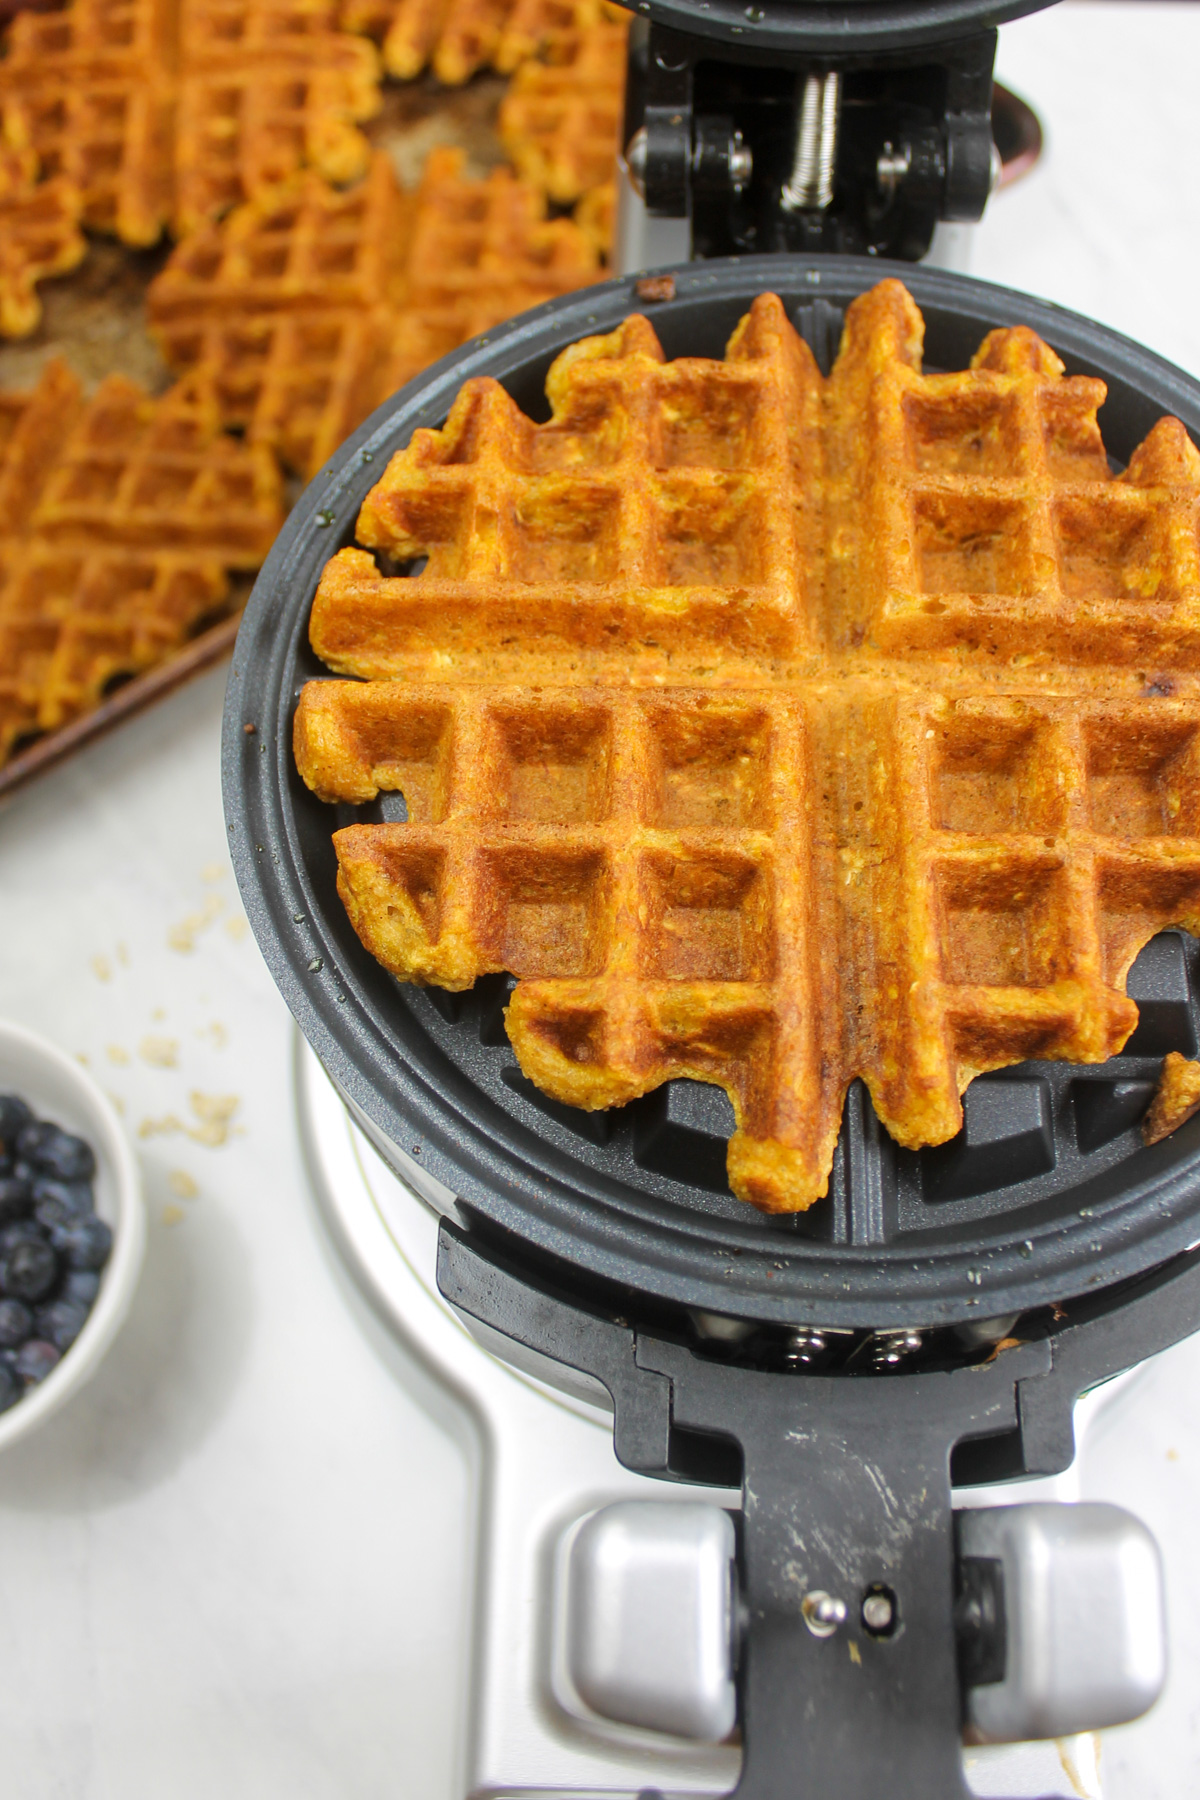 Pumpkin waffle in an opened waffle iron with a sheet pan of waffles behind it.